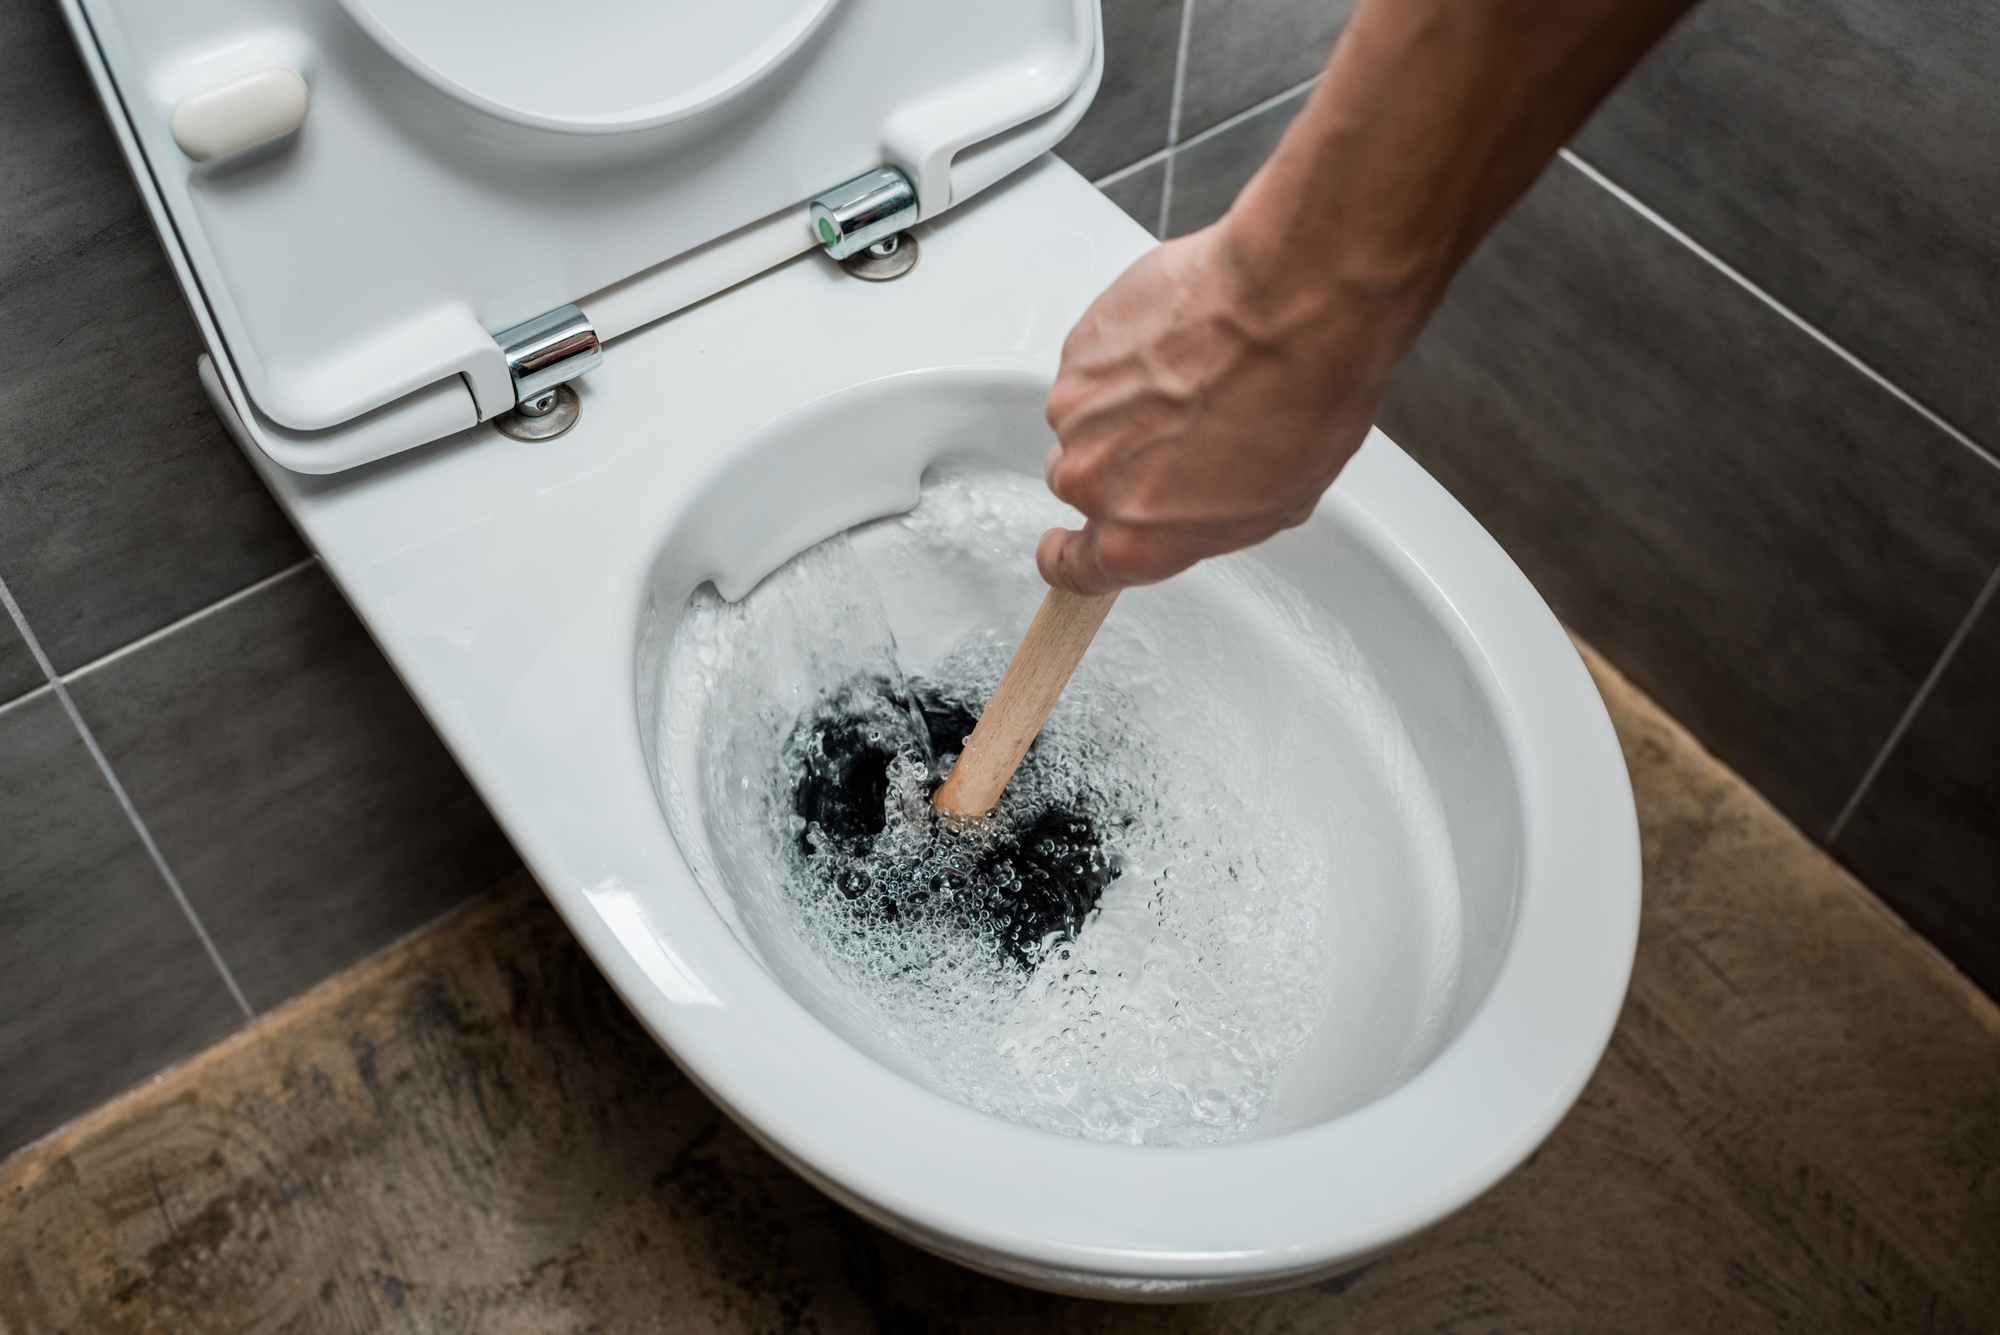 Essential Plumbing Tools Every Homeowner Should Have